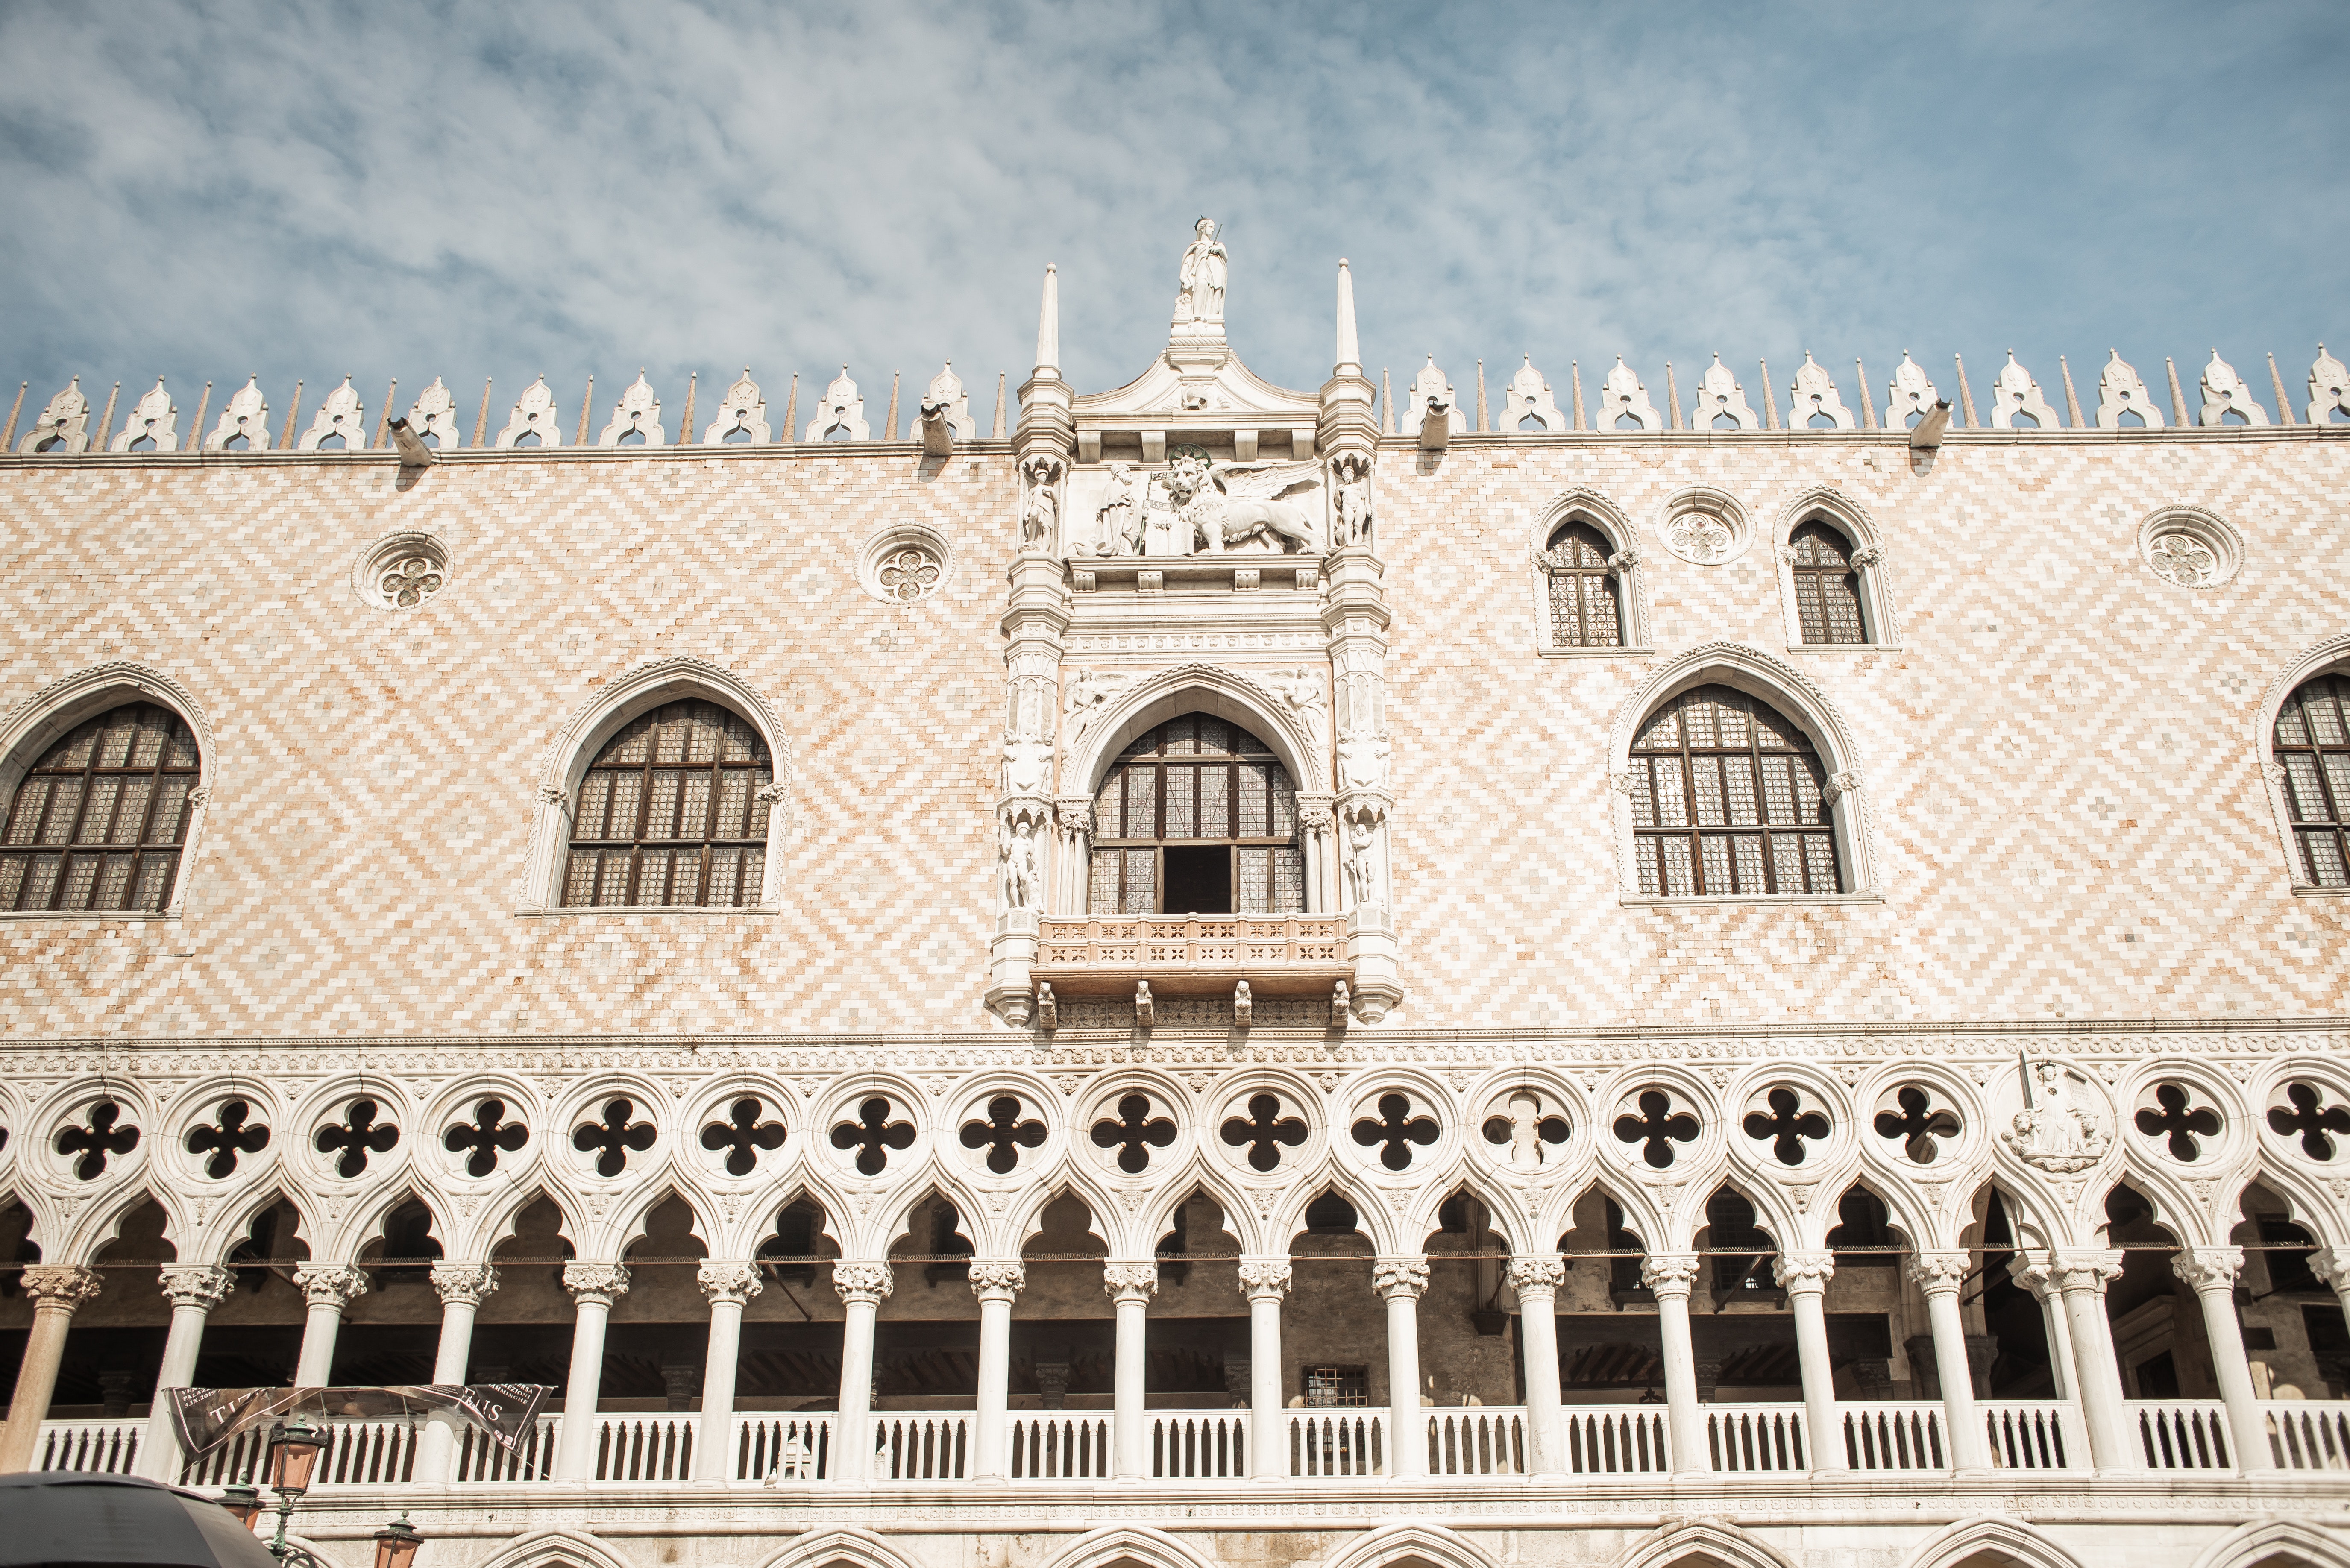 Palazzo Ducale for the “Best Landmarks” award